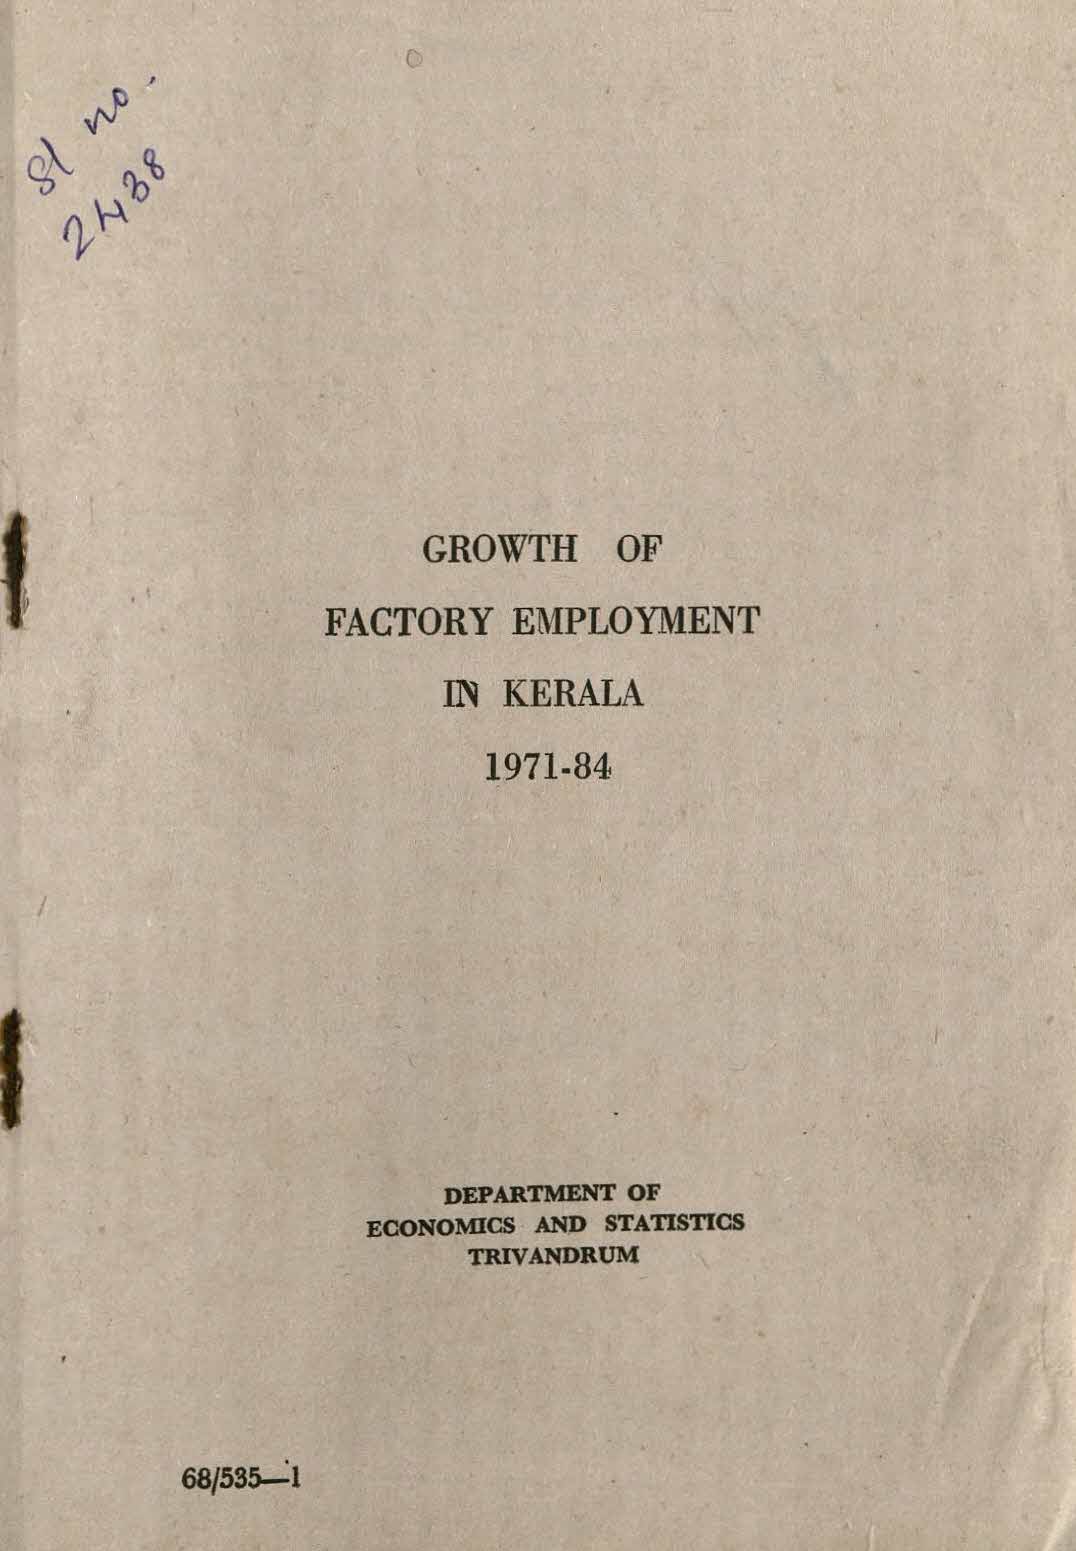 GROWTH OF FACTORY EMPLOYMENT IN KERALA 1971-84